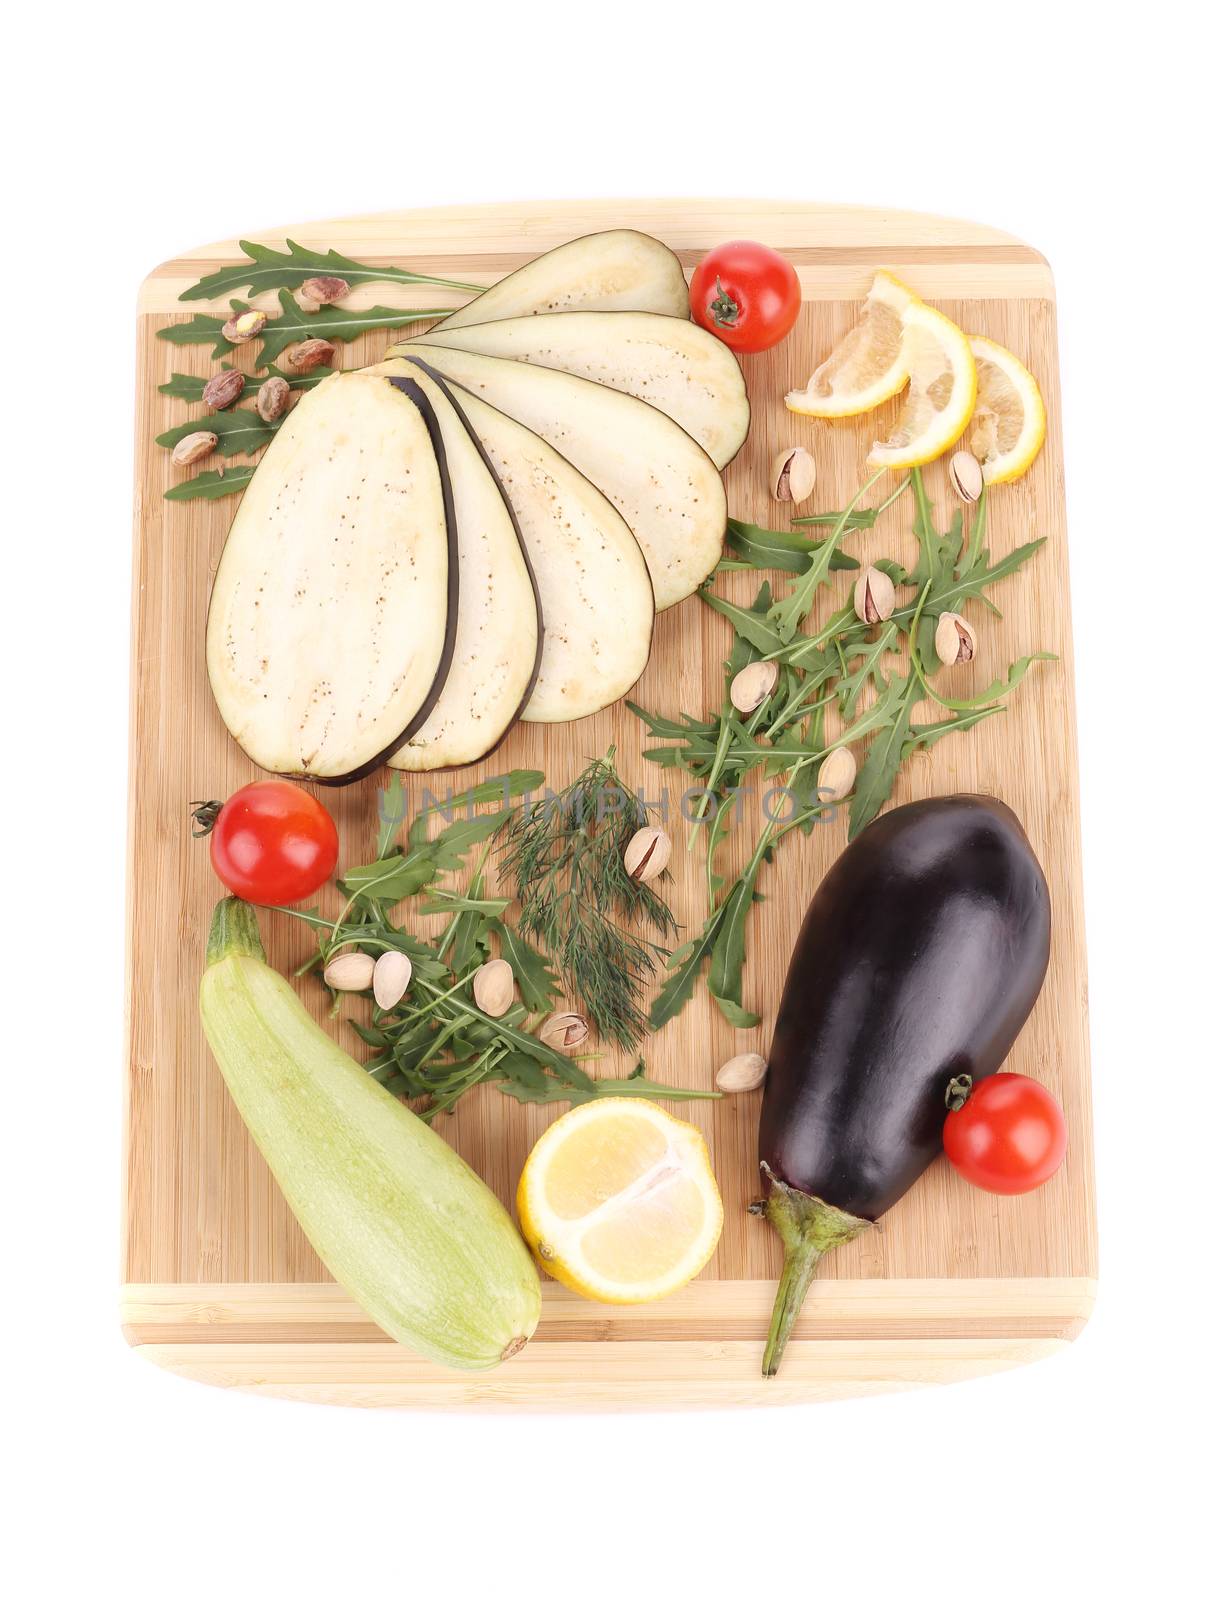 Vegetables with lemon on wooden platter. by indigolotos